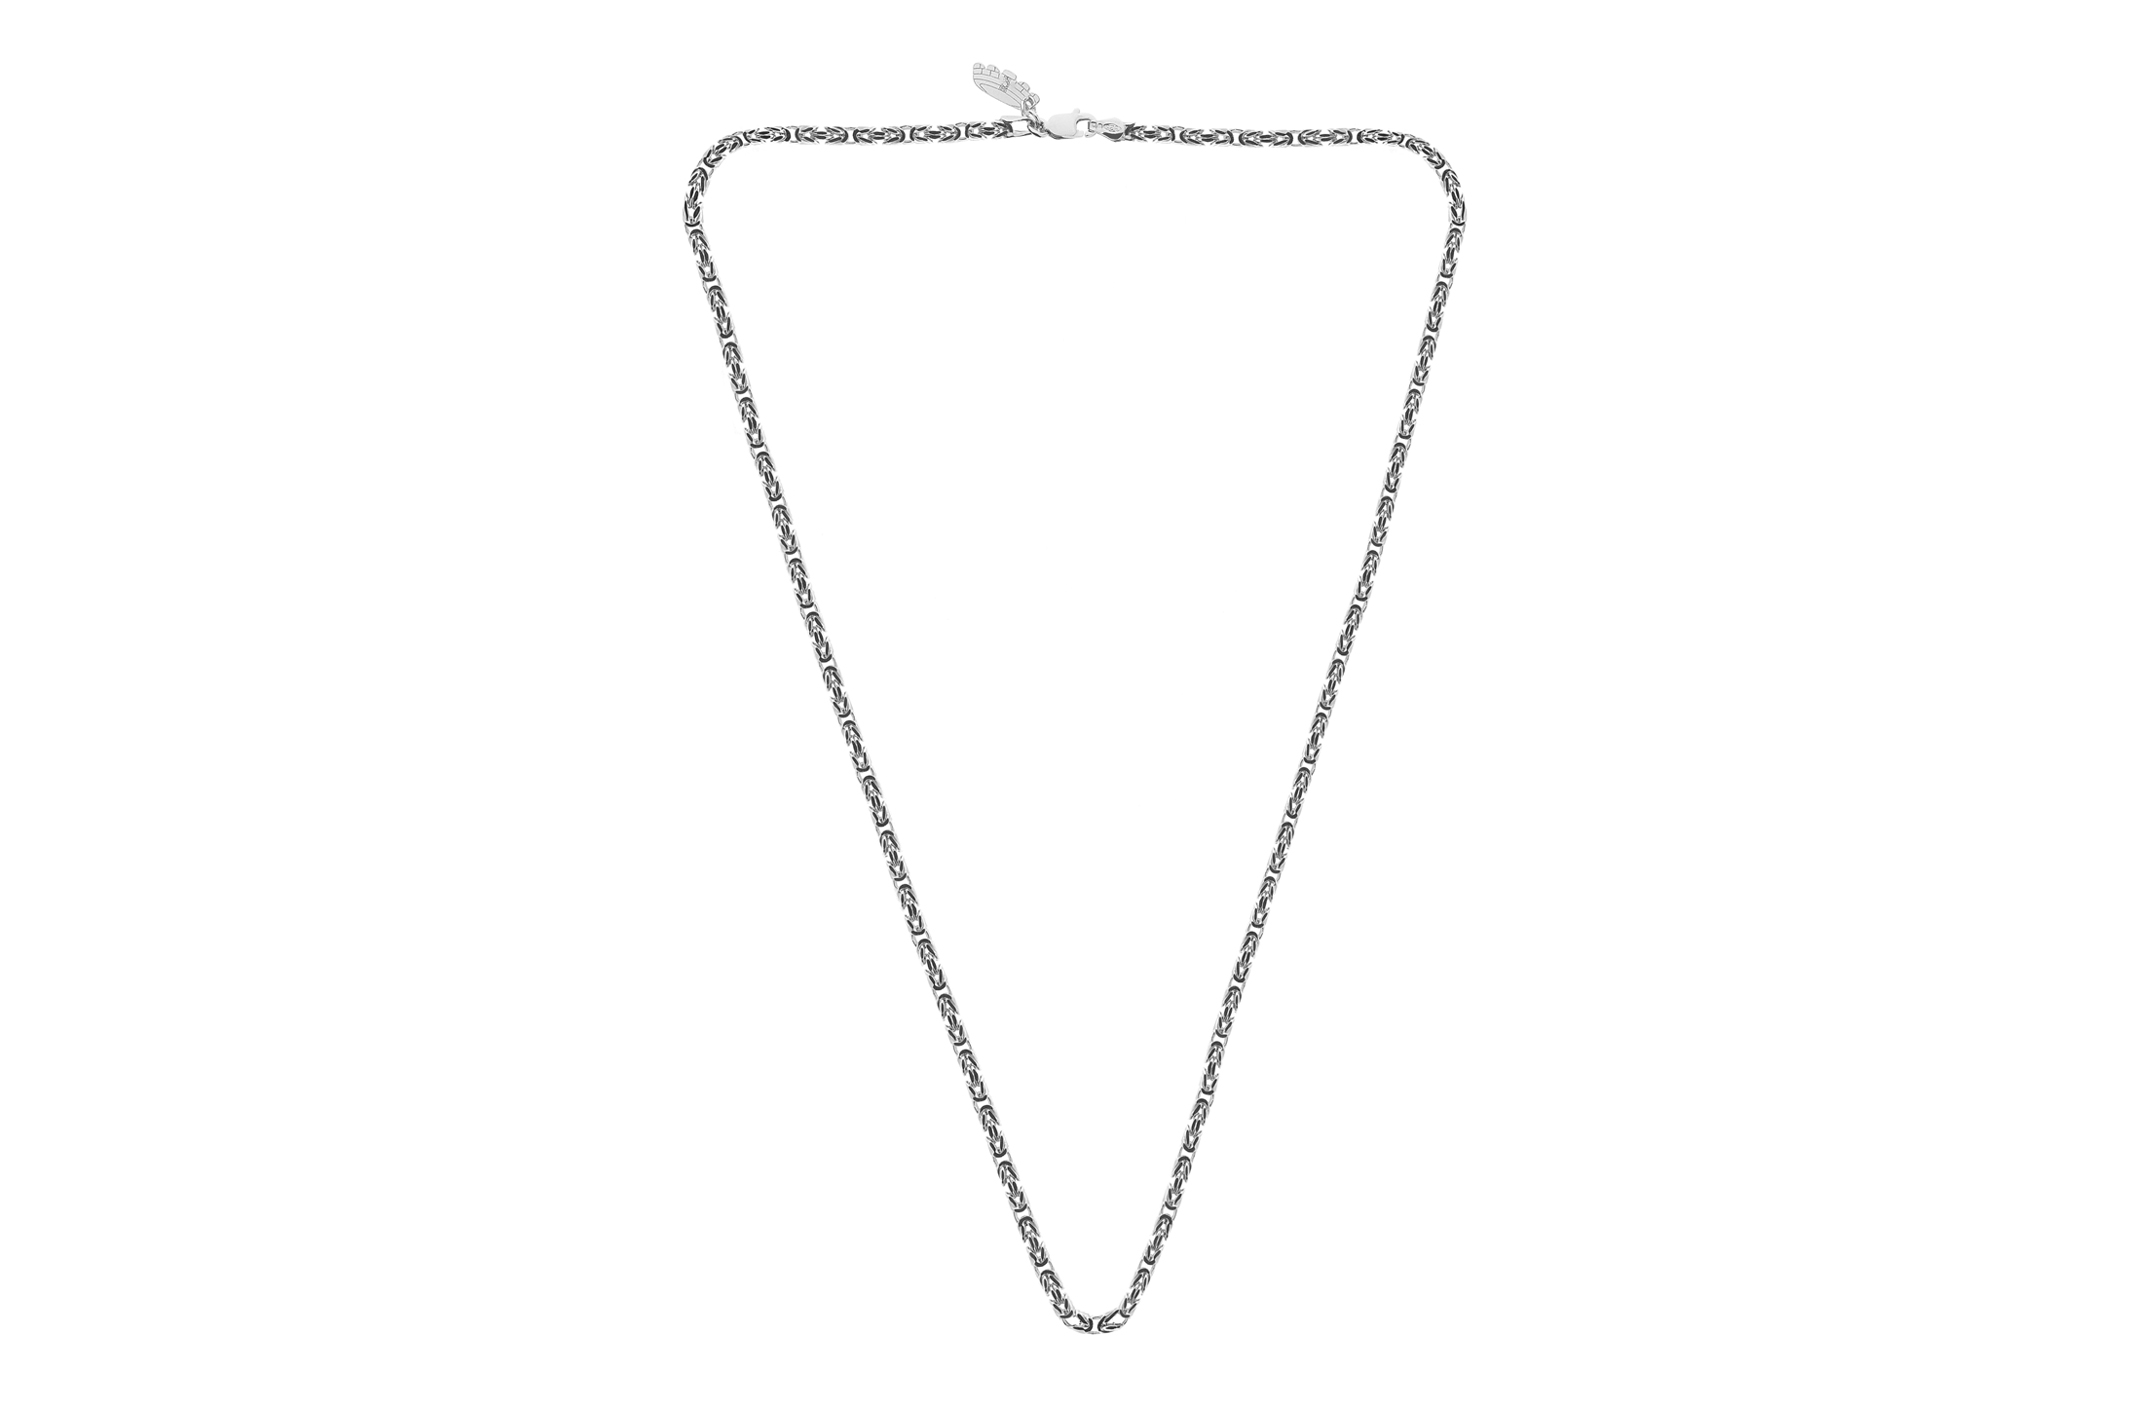 Jewel: necklace;Material: silver 925;Weight: 21.9 gr;Color: white;Size: 48 cm